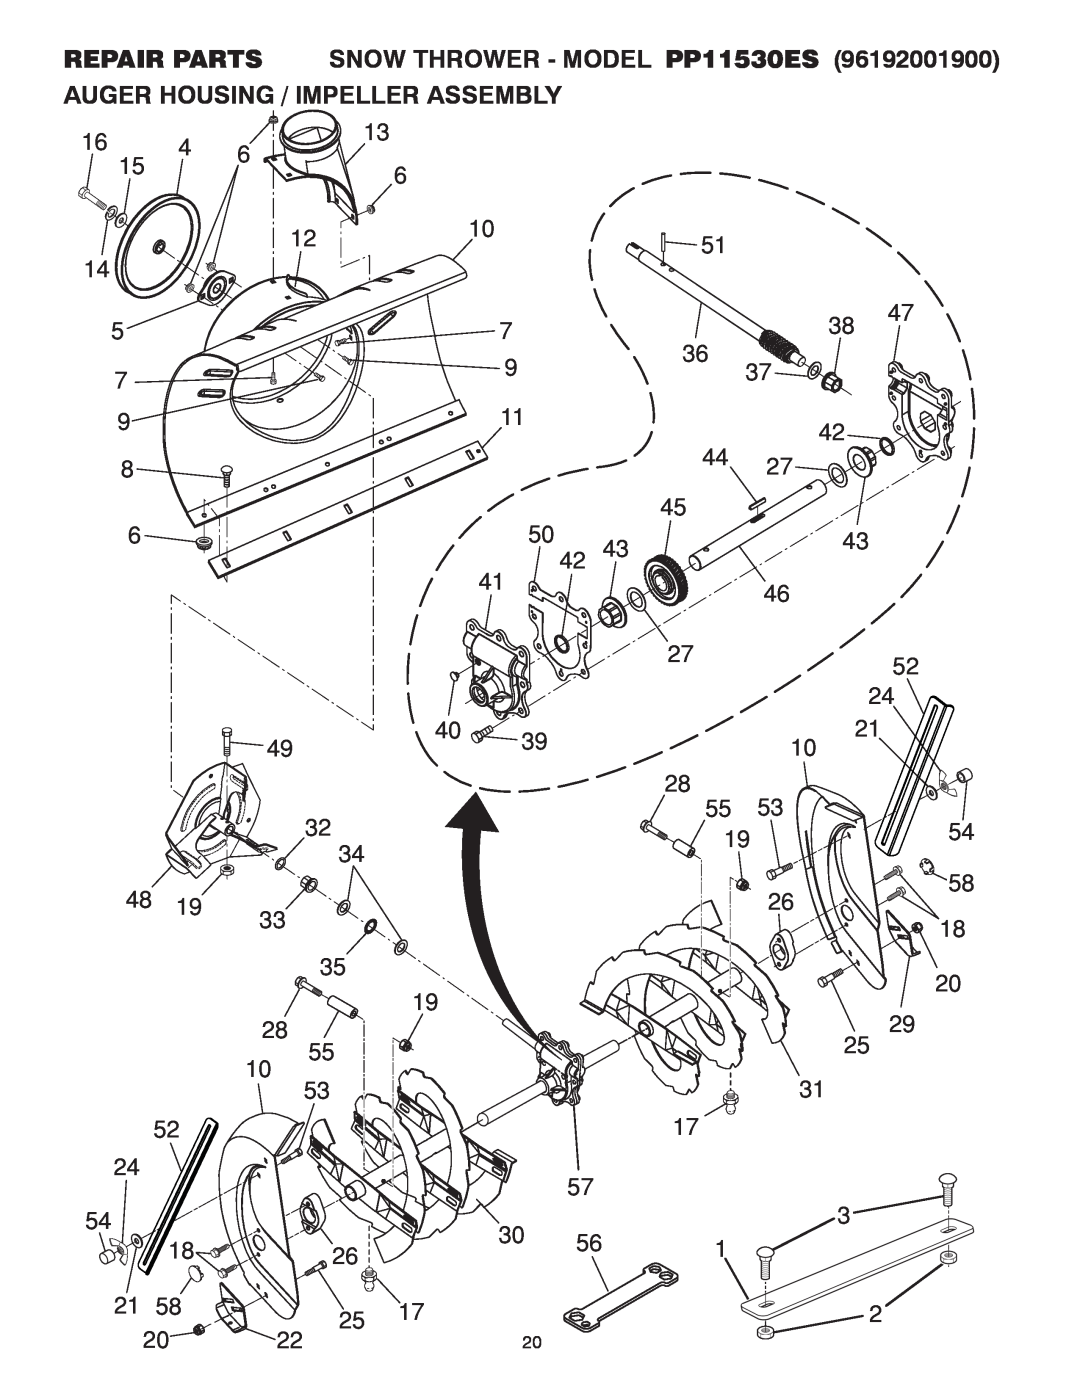 Poulan owner manual REPAIR PARTS SNOW THROWER - MODEL PP11530ES, Auger Housing / Impeller Assembly, 2220 